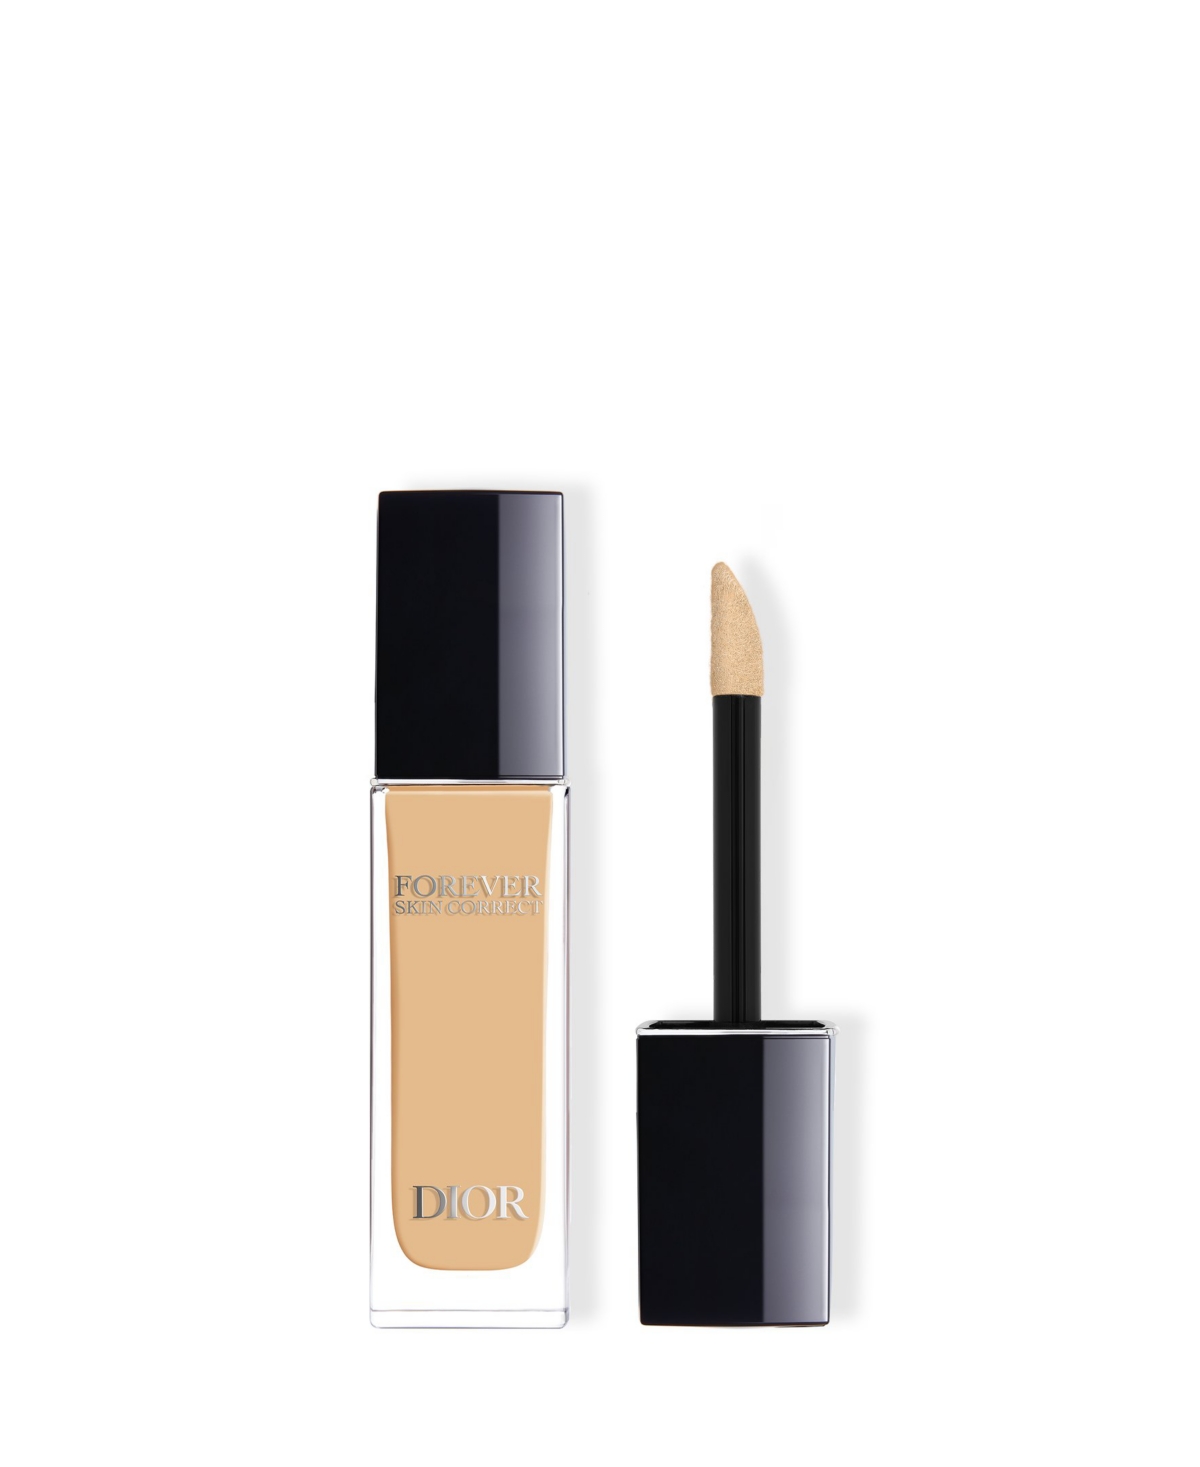 Dior Forever Skin Correct Full-coverage Concealer In Wo Warm Olive (light Skin With Warm Oliv